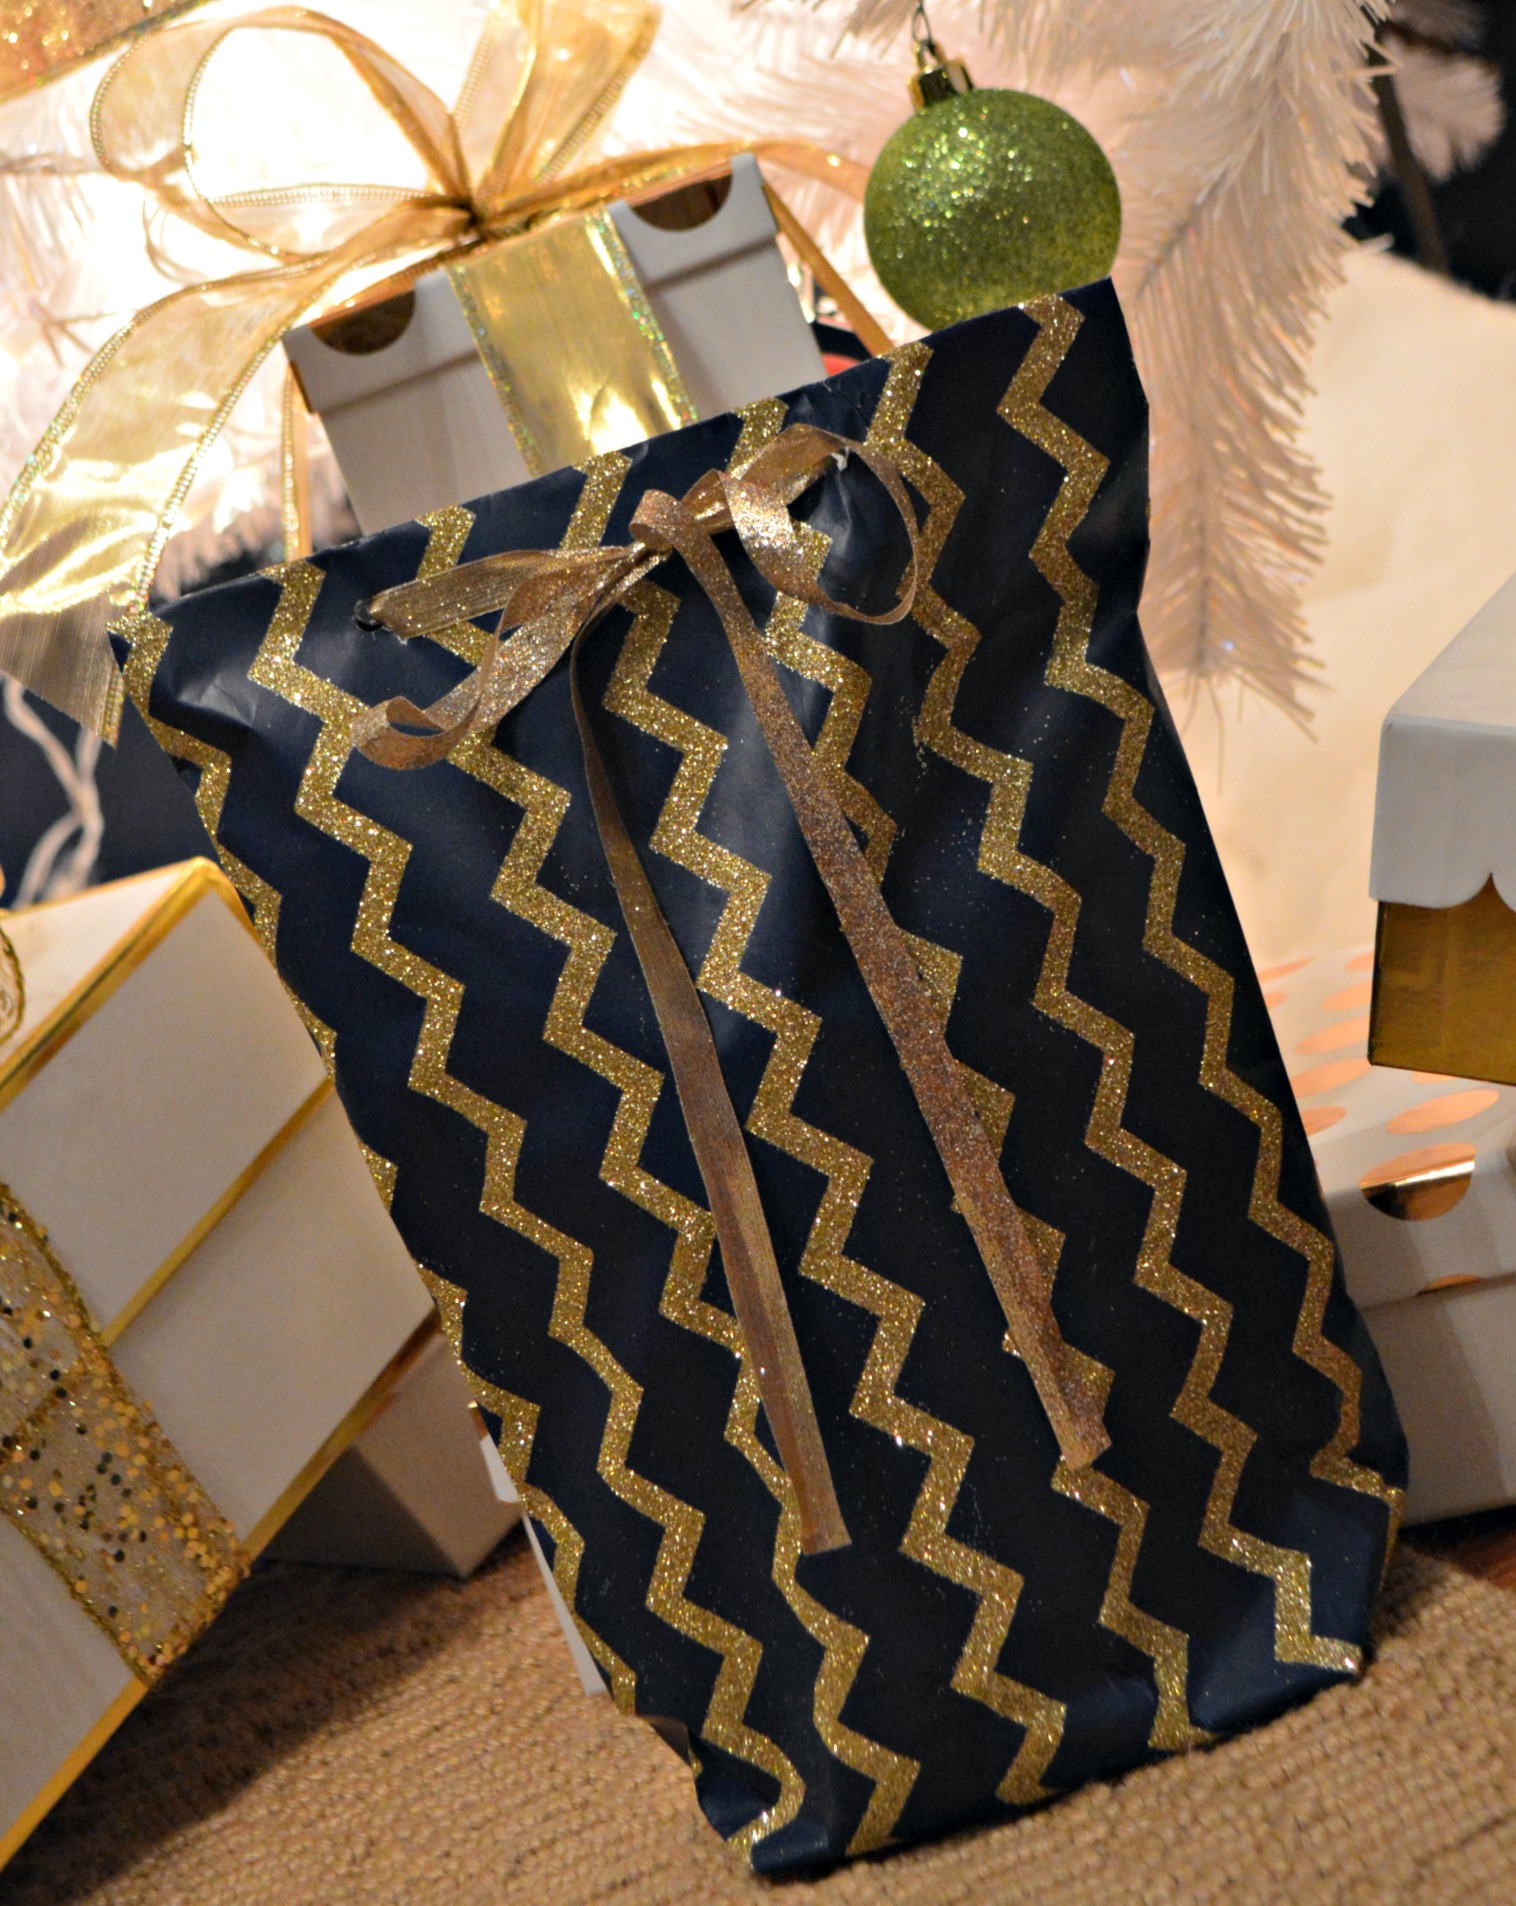 How to Make a Gift Bag Out of Wrapping Paper: 6 Easy Steps